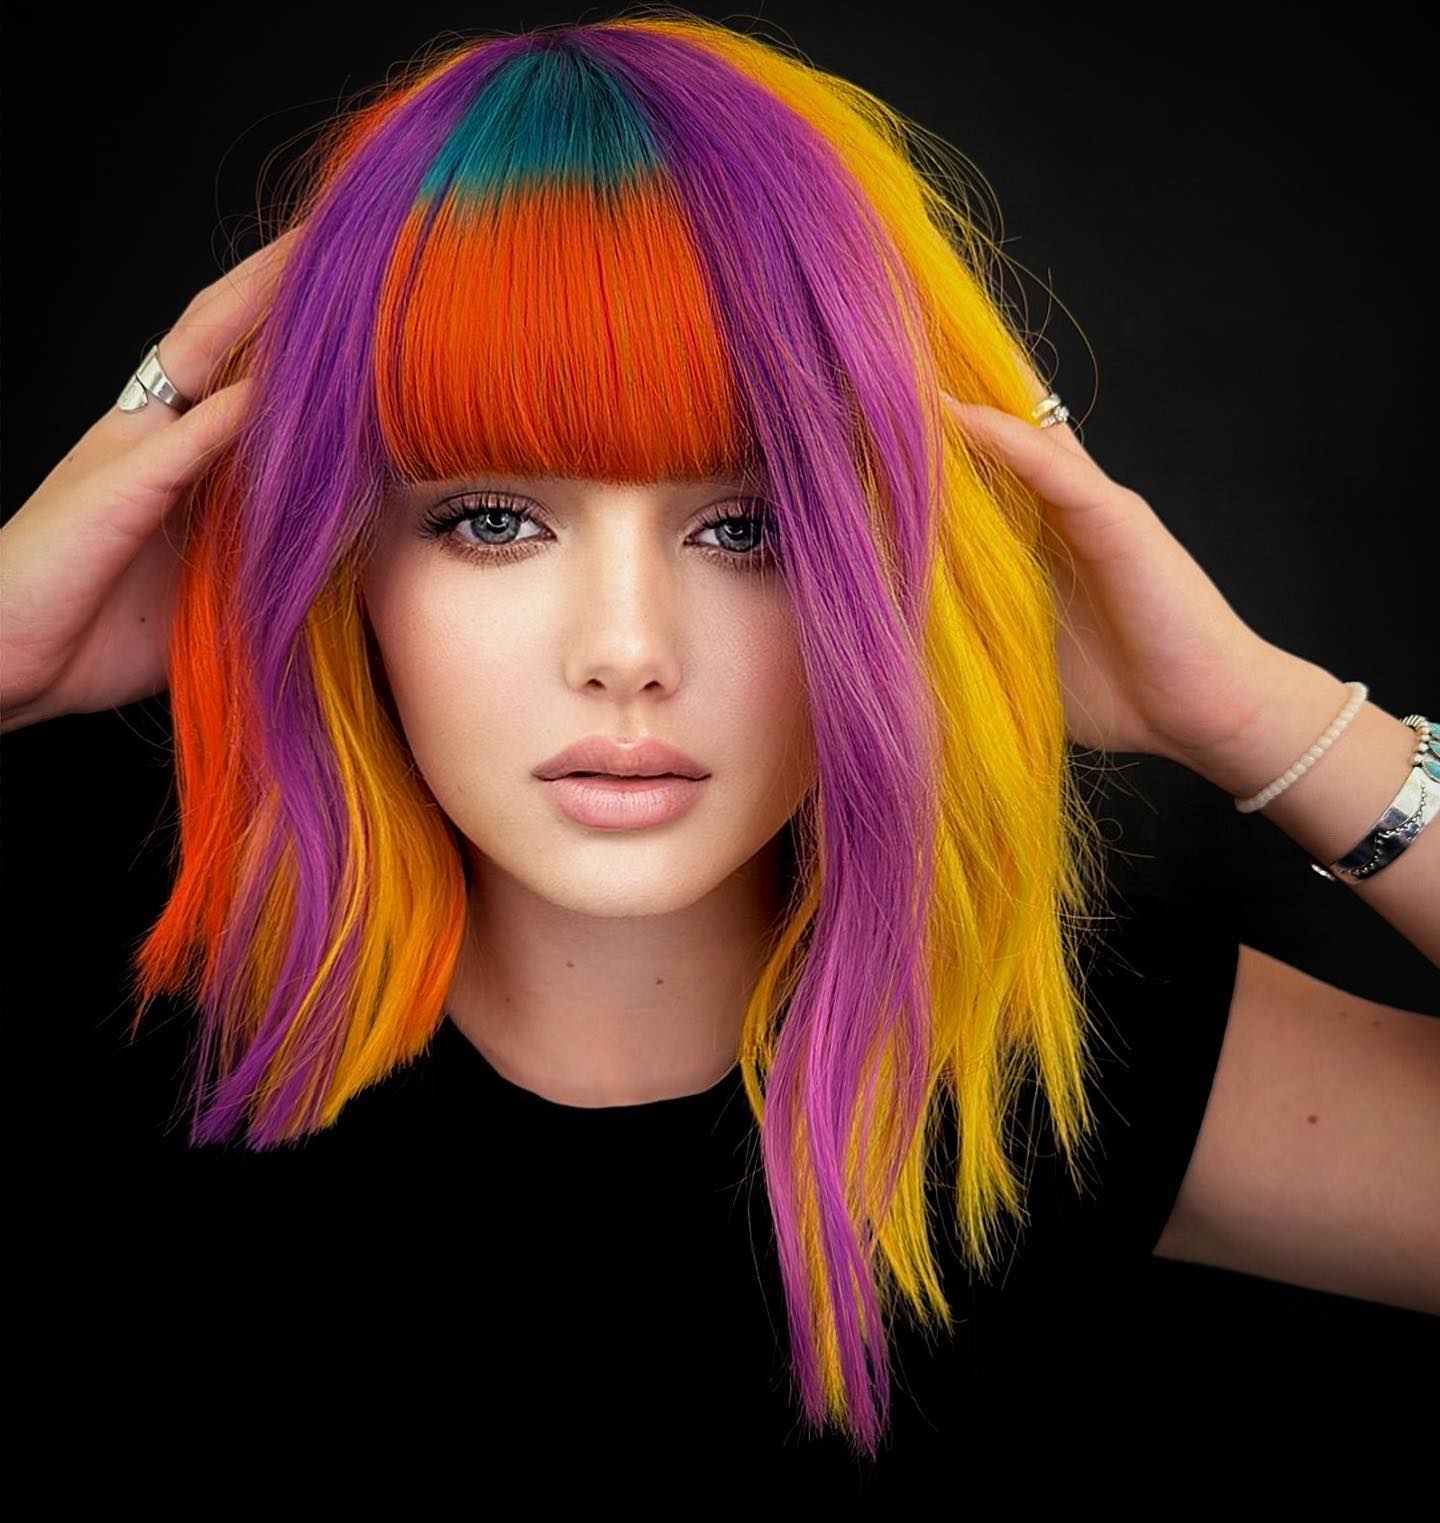 100+ Best Colorful Hair Ideas images 11